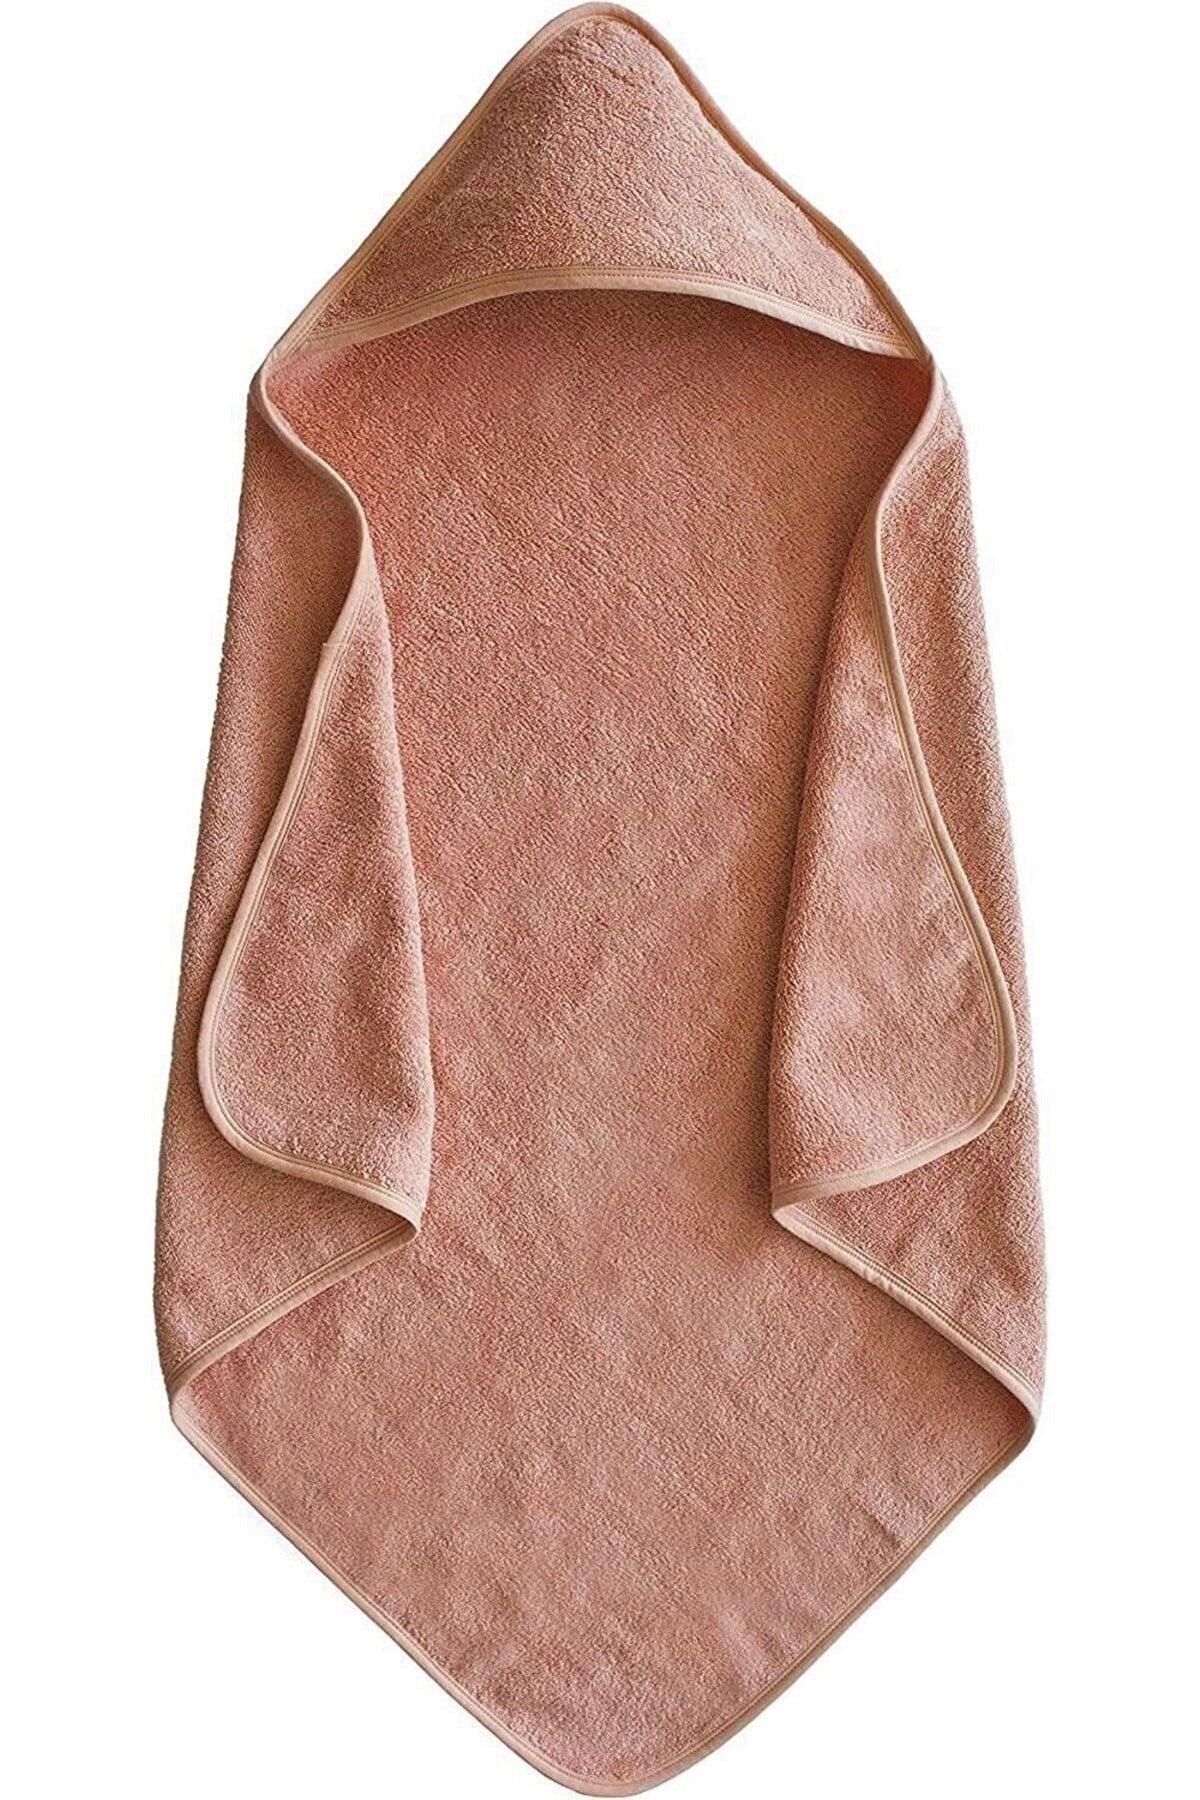 Cotton Baby-kids Hooded Towel Dried Rose Swaddle Poncho - Swordslife